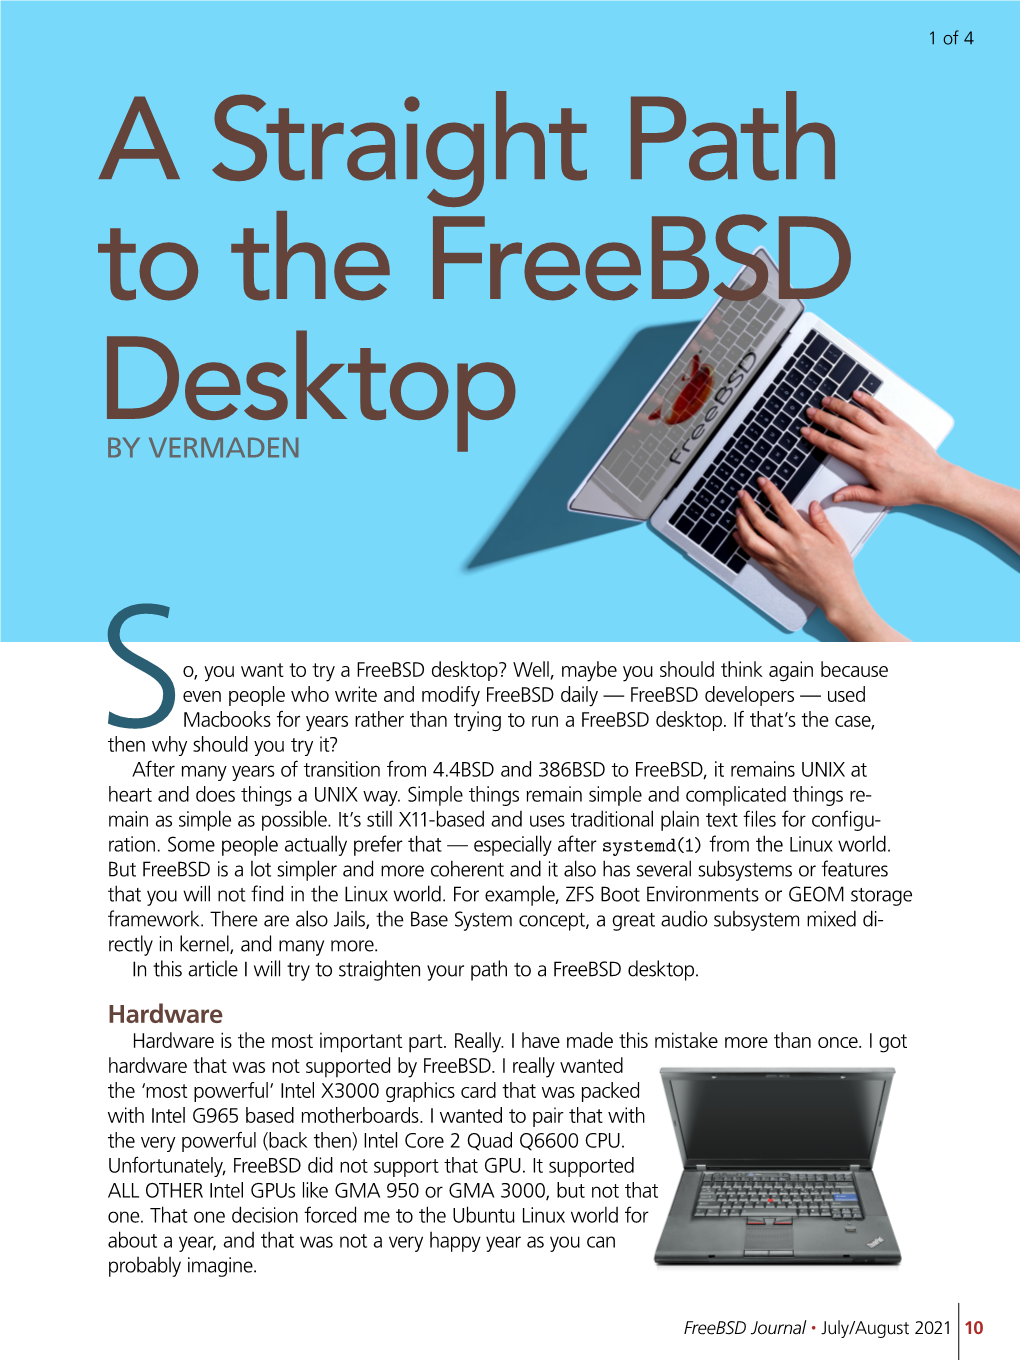 A Straight Path to the Freebsd Desktop